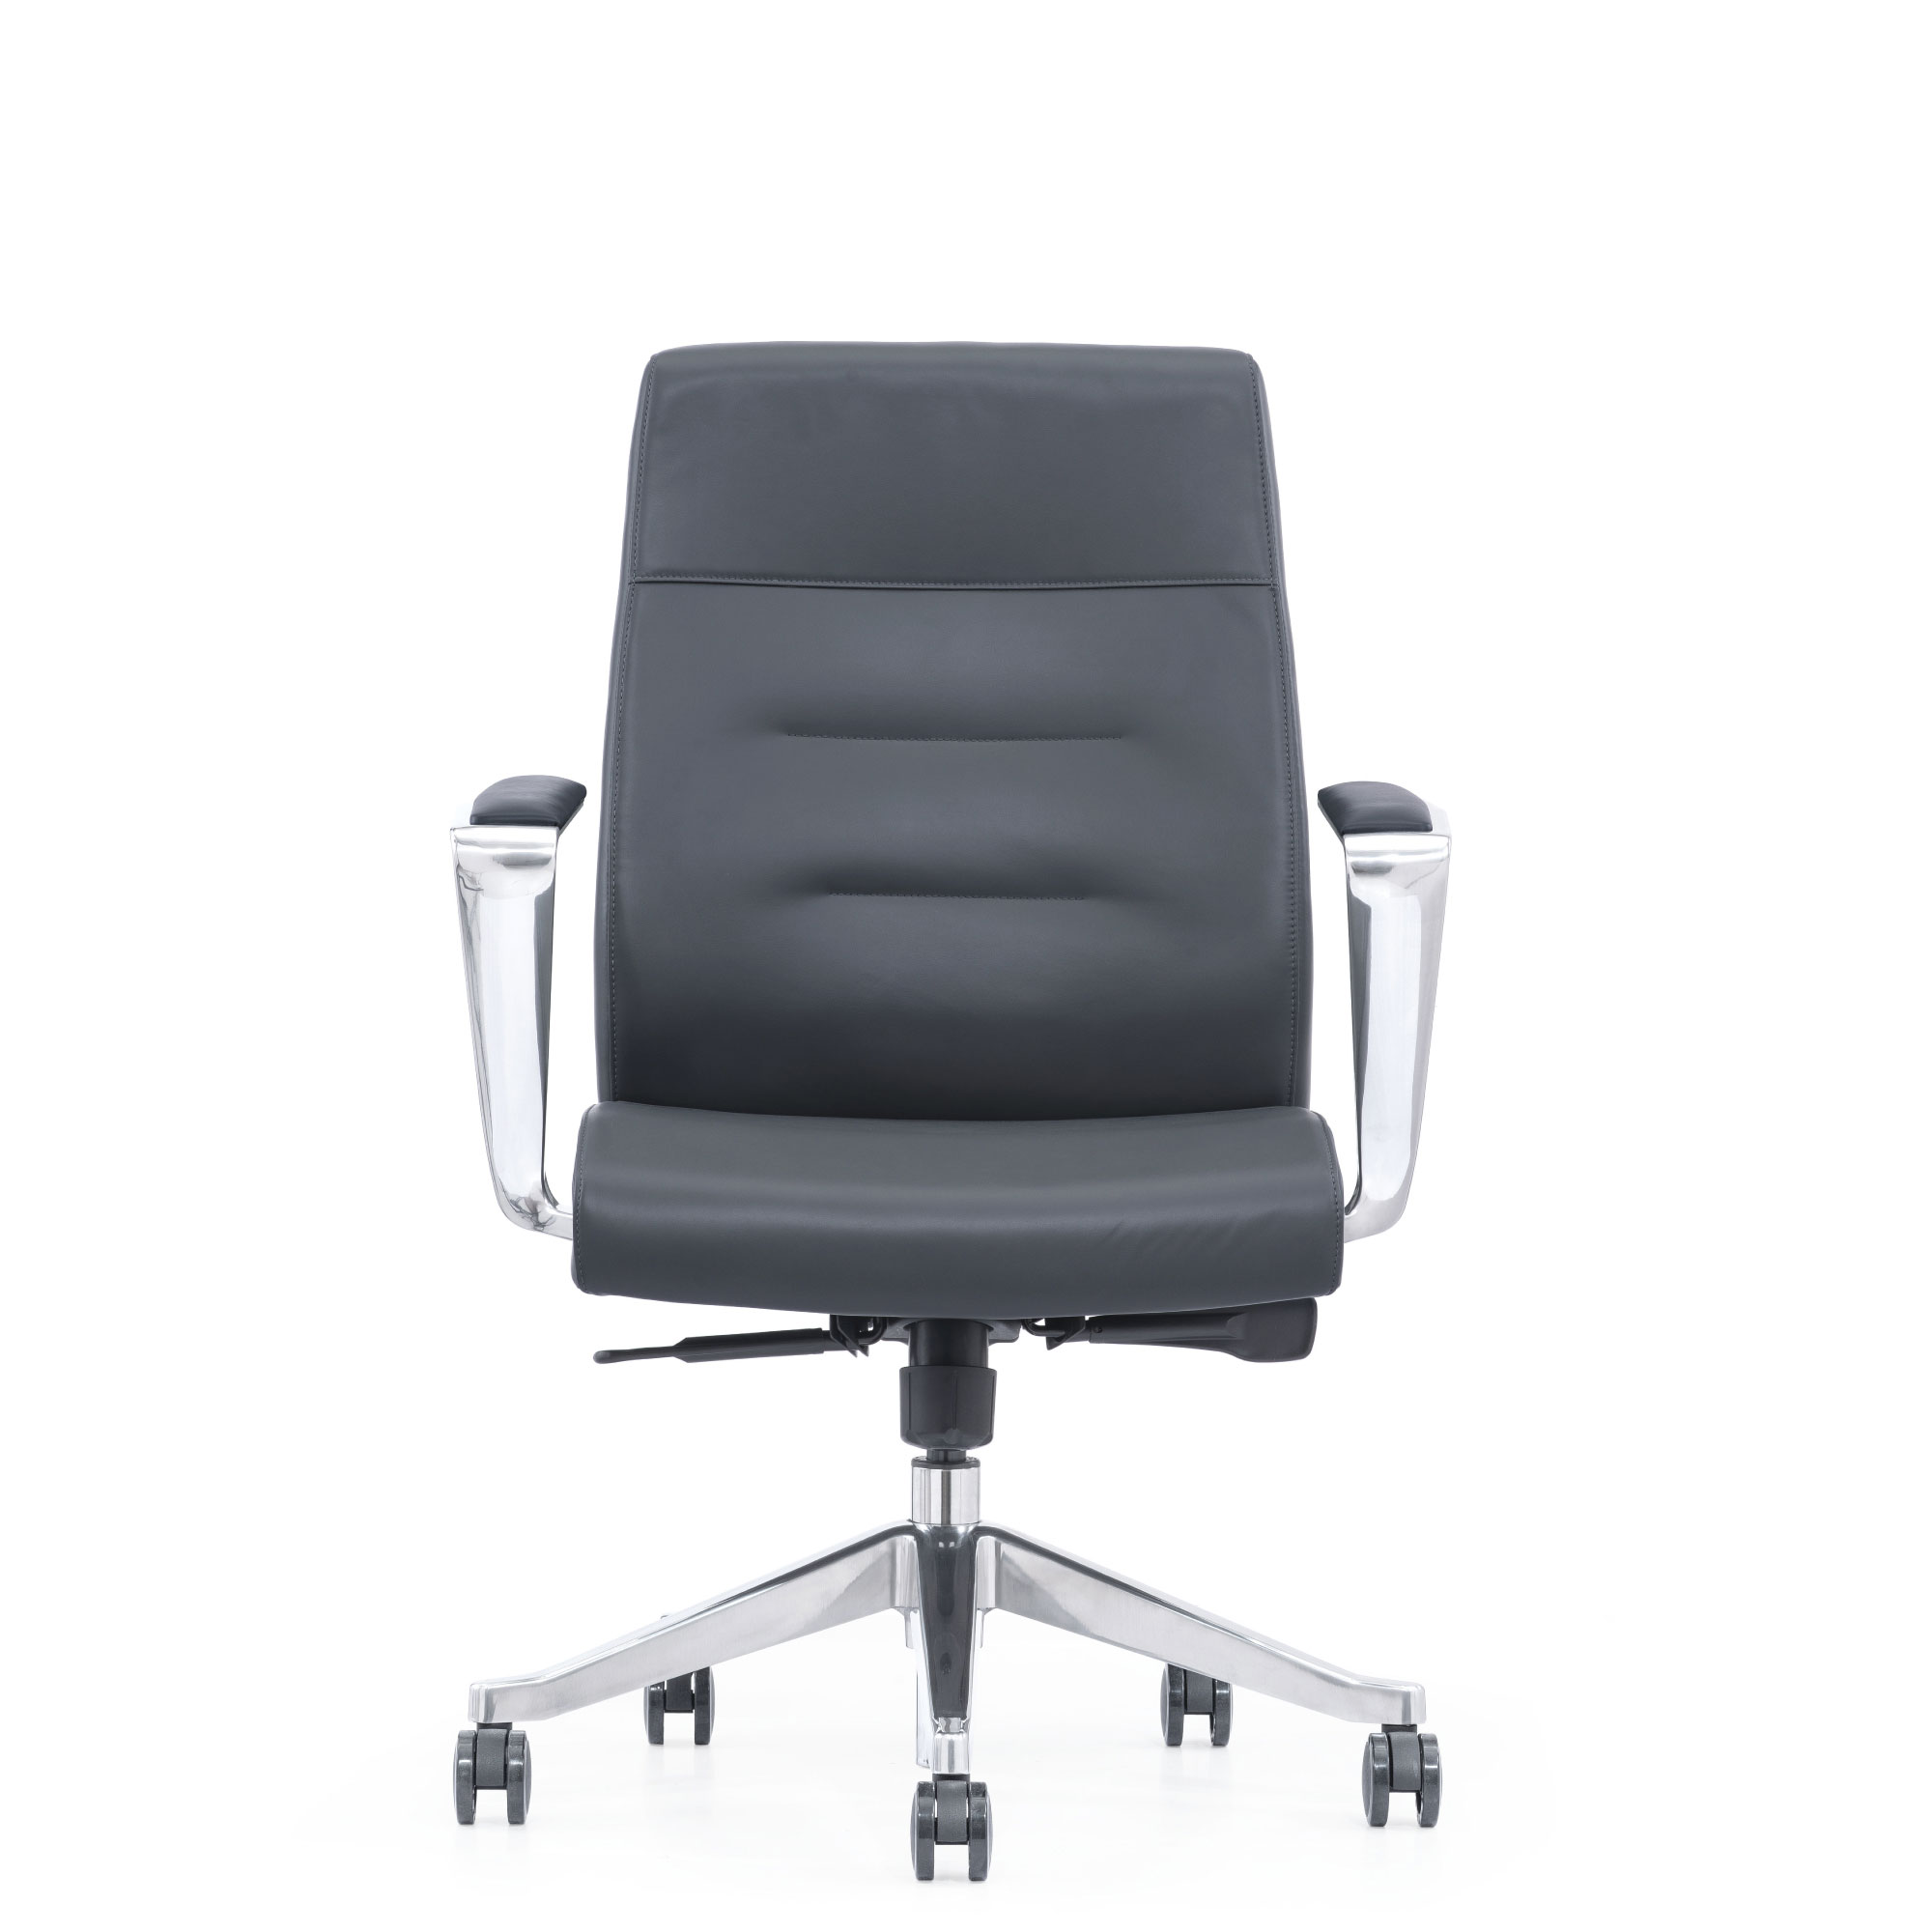 Gray leather home office chair